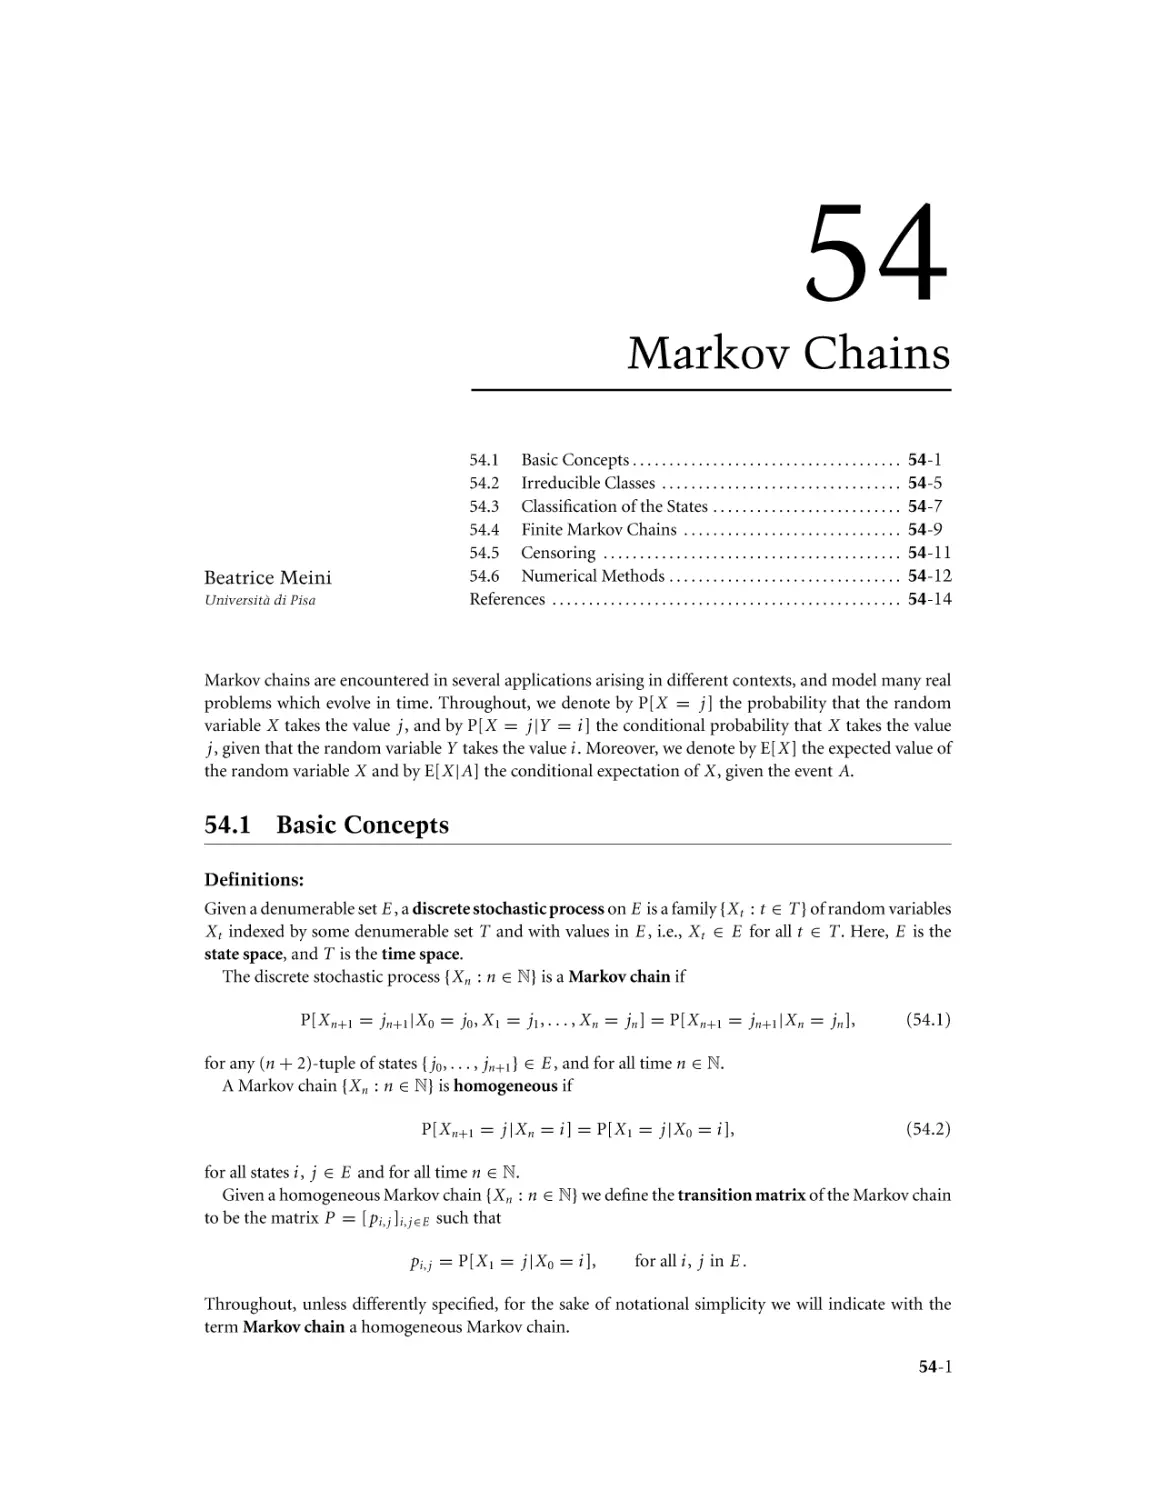 Chapter 54. Markov Chains